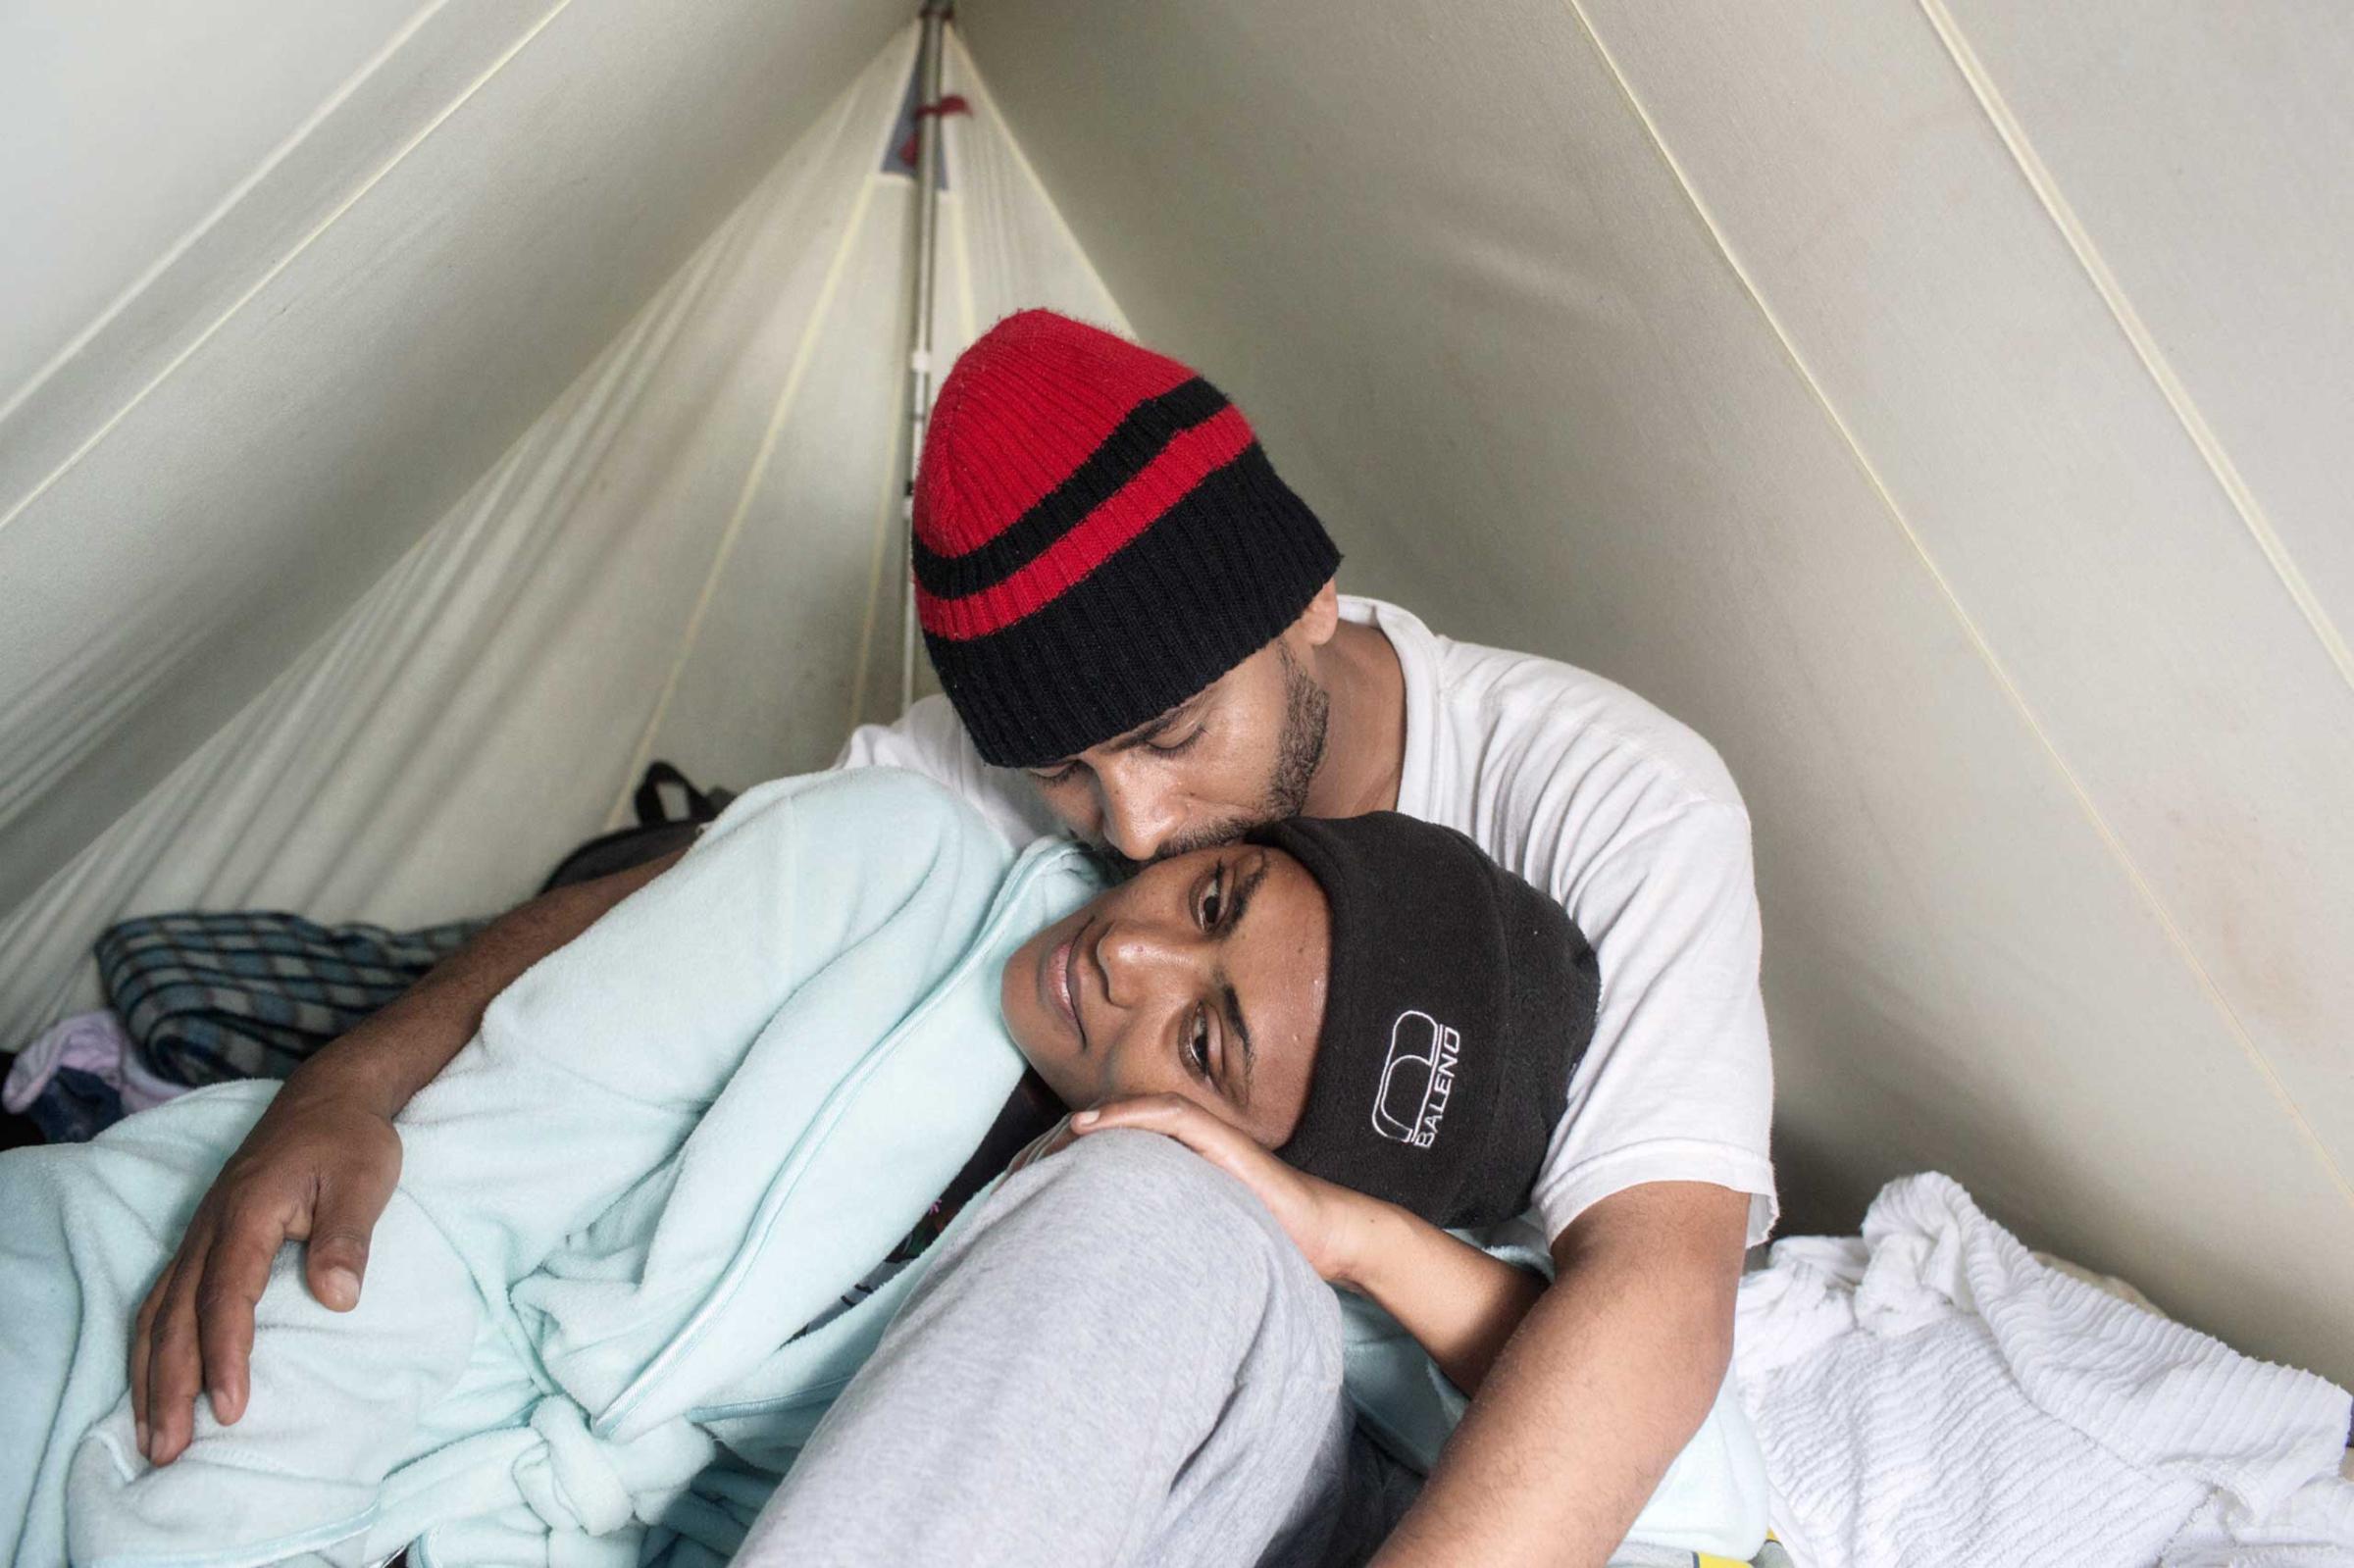 Ahmed from Ethiopia and his girlfriend “Eva” from Eritrea, who met during the journey to France and were expecting a child, resting in their tent in the “Jungle,“ a camp for refugees in Calais, France, 2014. “We met during the journey and we haven’t parted since,” said Ahmed, who hoped their child would be born in England.